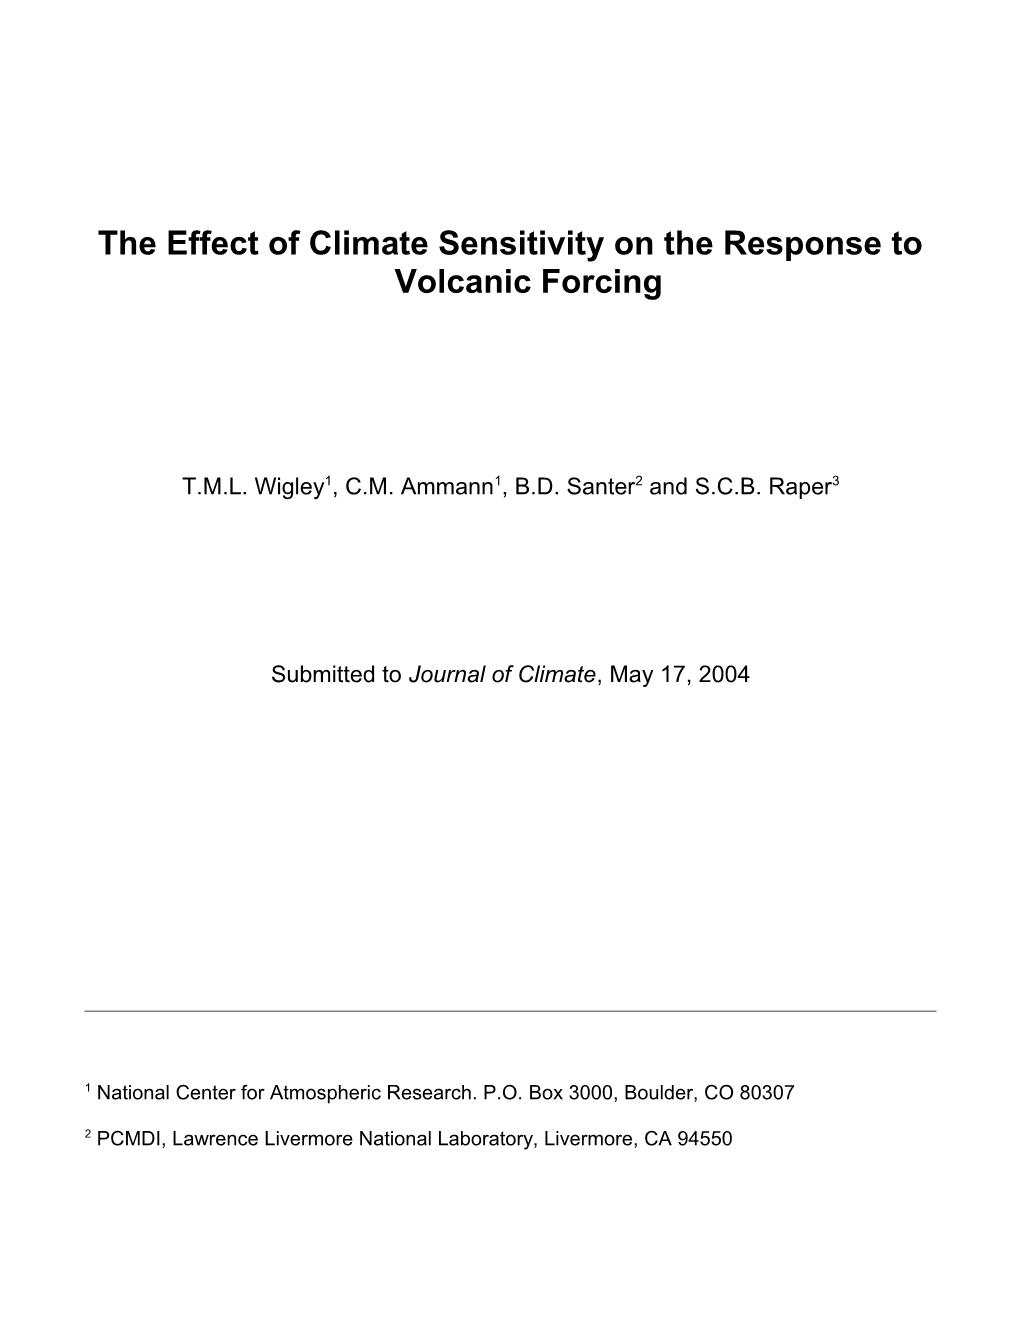 The Effect of Climate Sensitivity on the Response to Volcanic Forcing